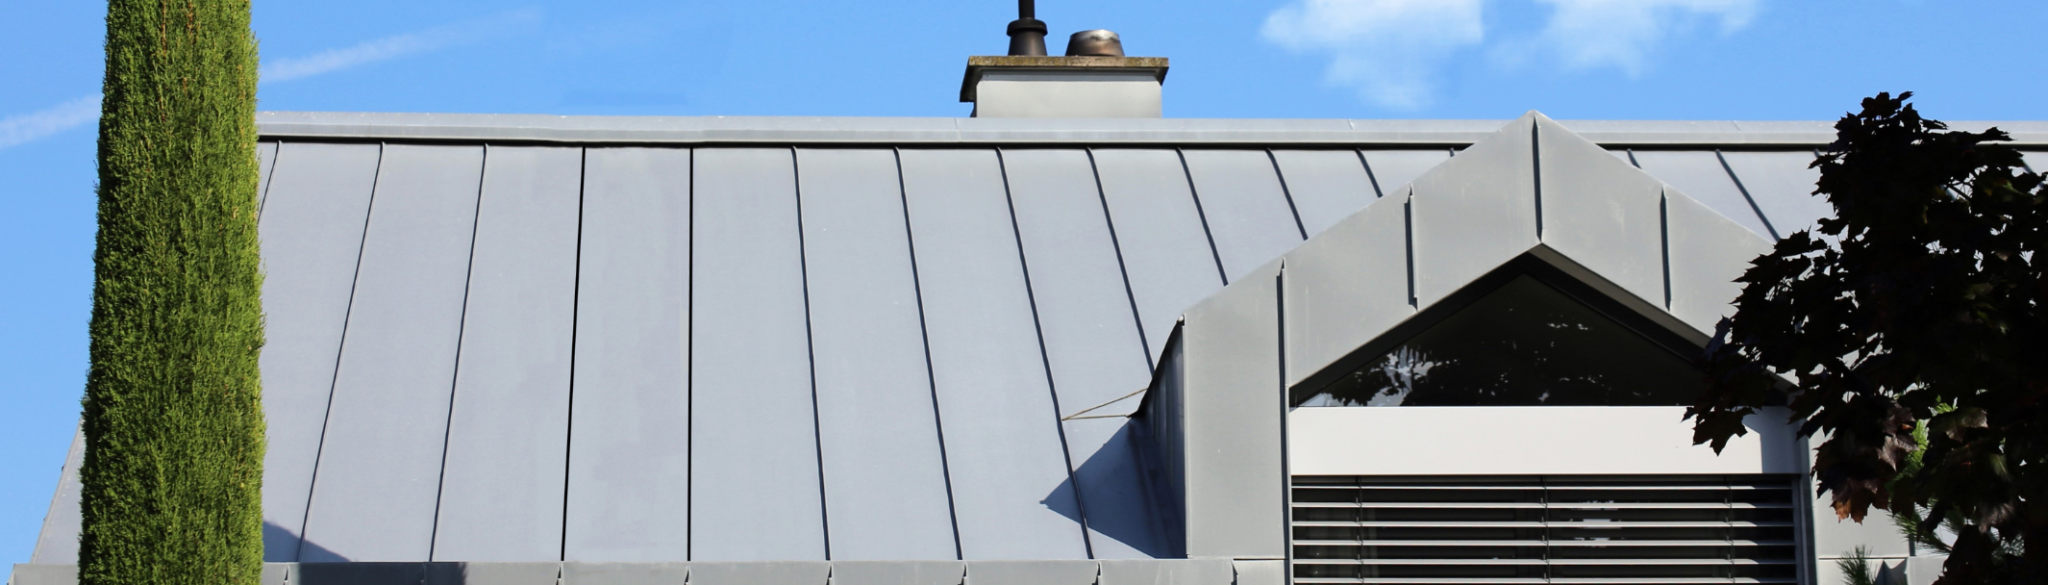 commercial roofing trends